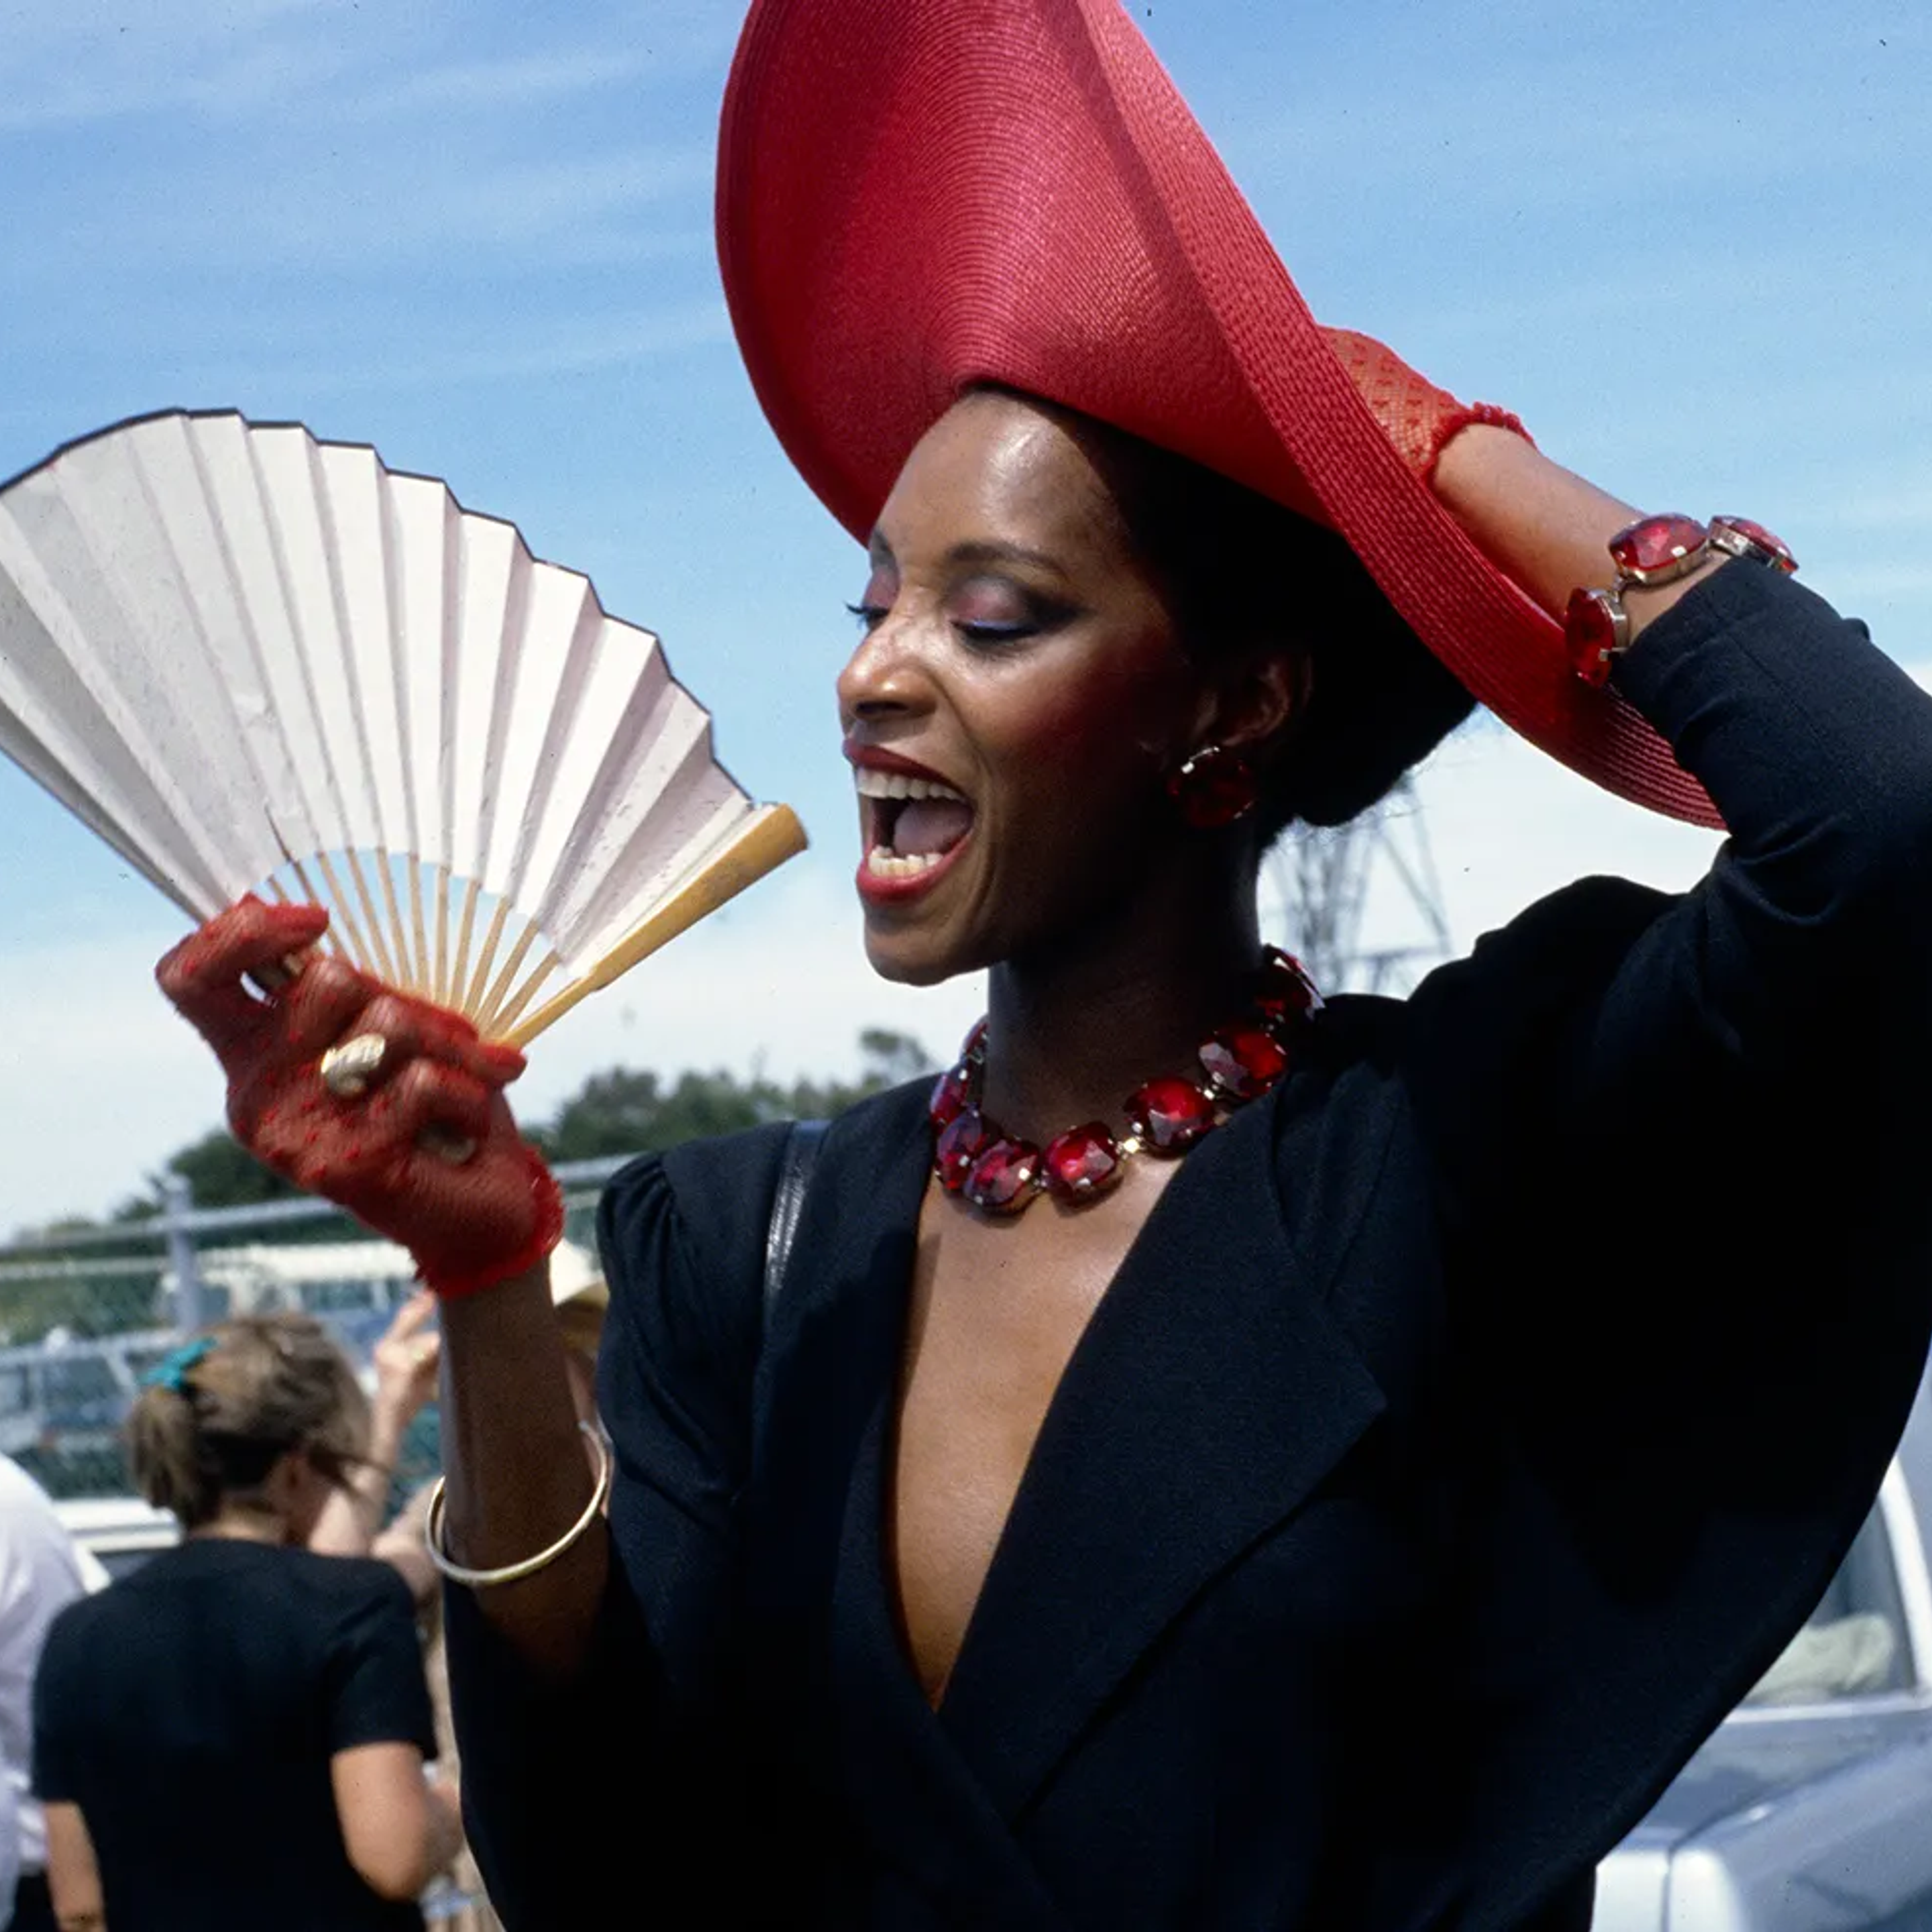 A woman poses holding onto her red fascinator-style hat with one hand and an unfurled fan in the other